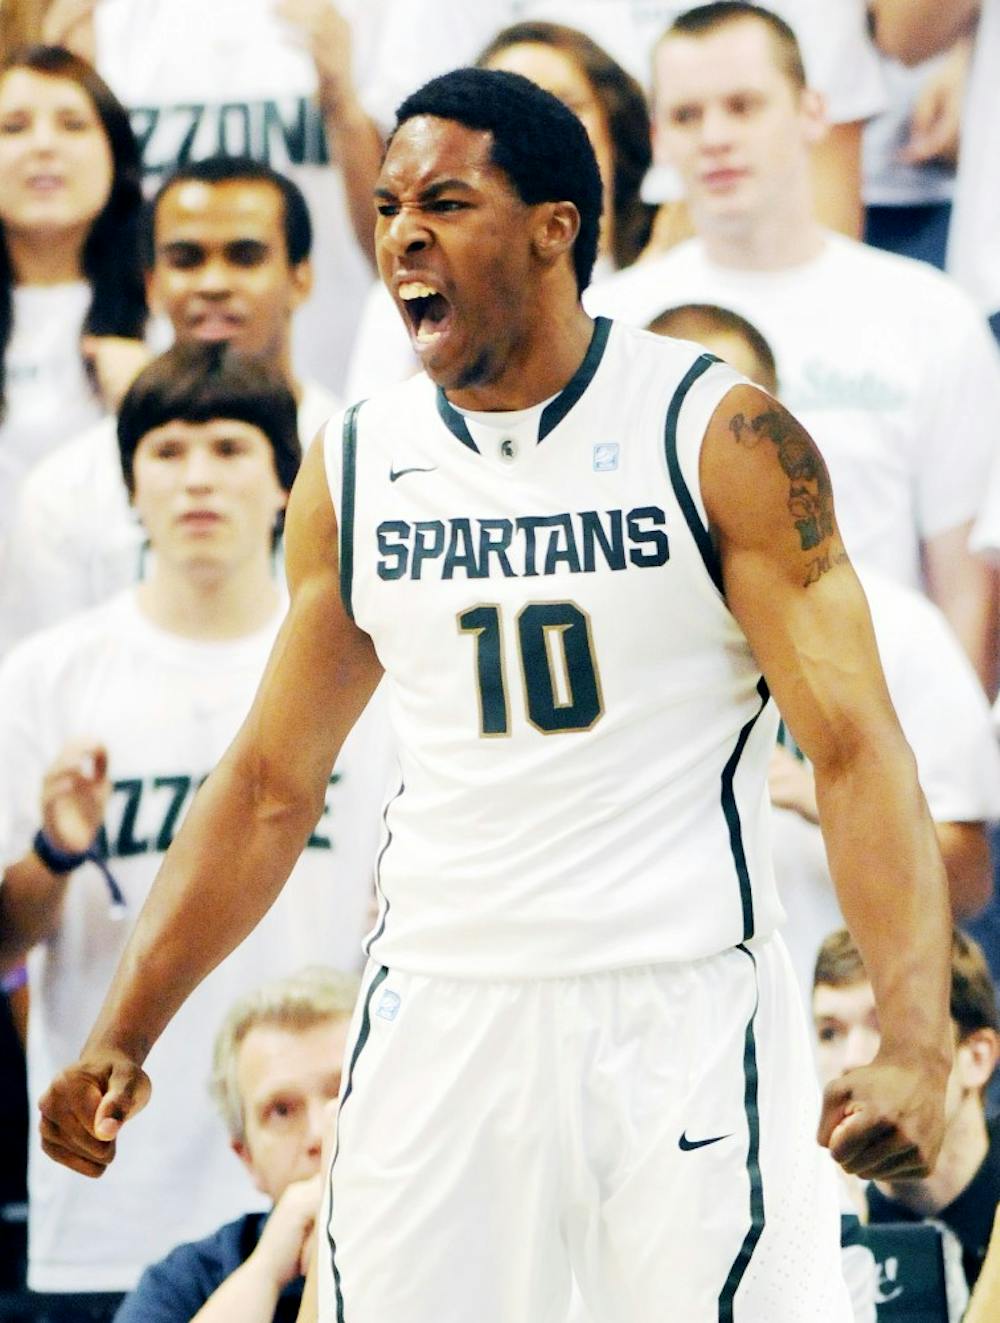 Junior forward Delvon Roe gets fired up after a play against Eastern Michigan. The Spartans defeated the Eagles, 96-66, on Nov. 12 at Breslin Center. Josh Radtke/The State News